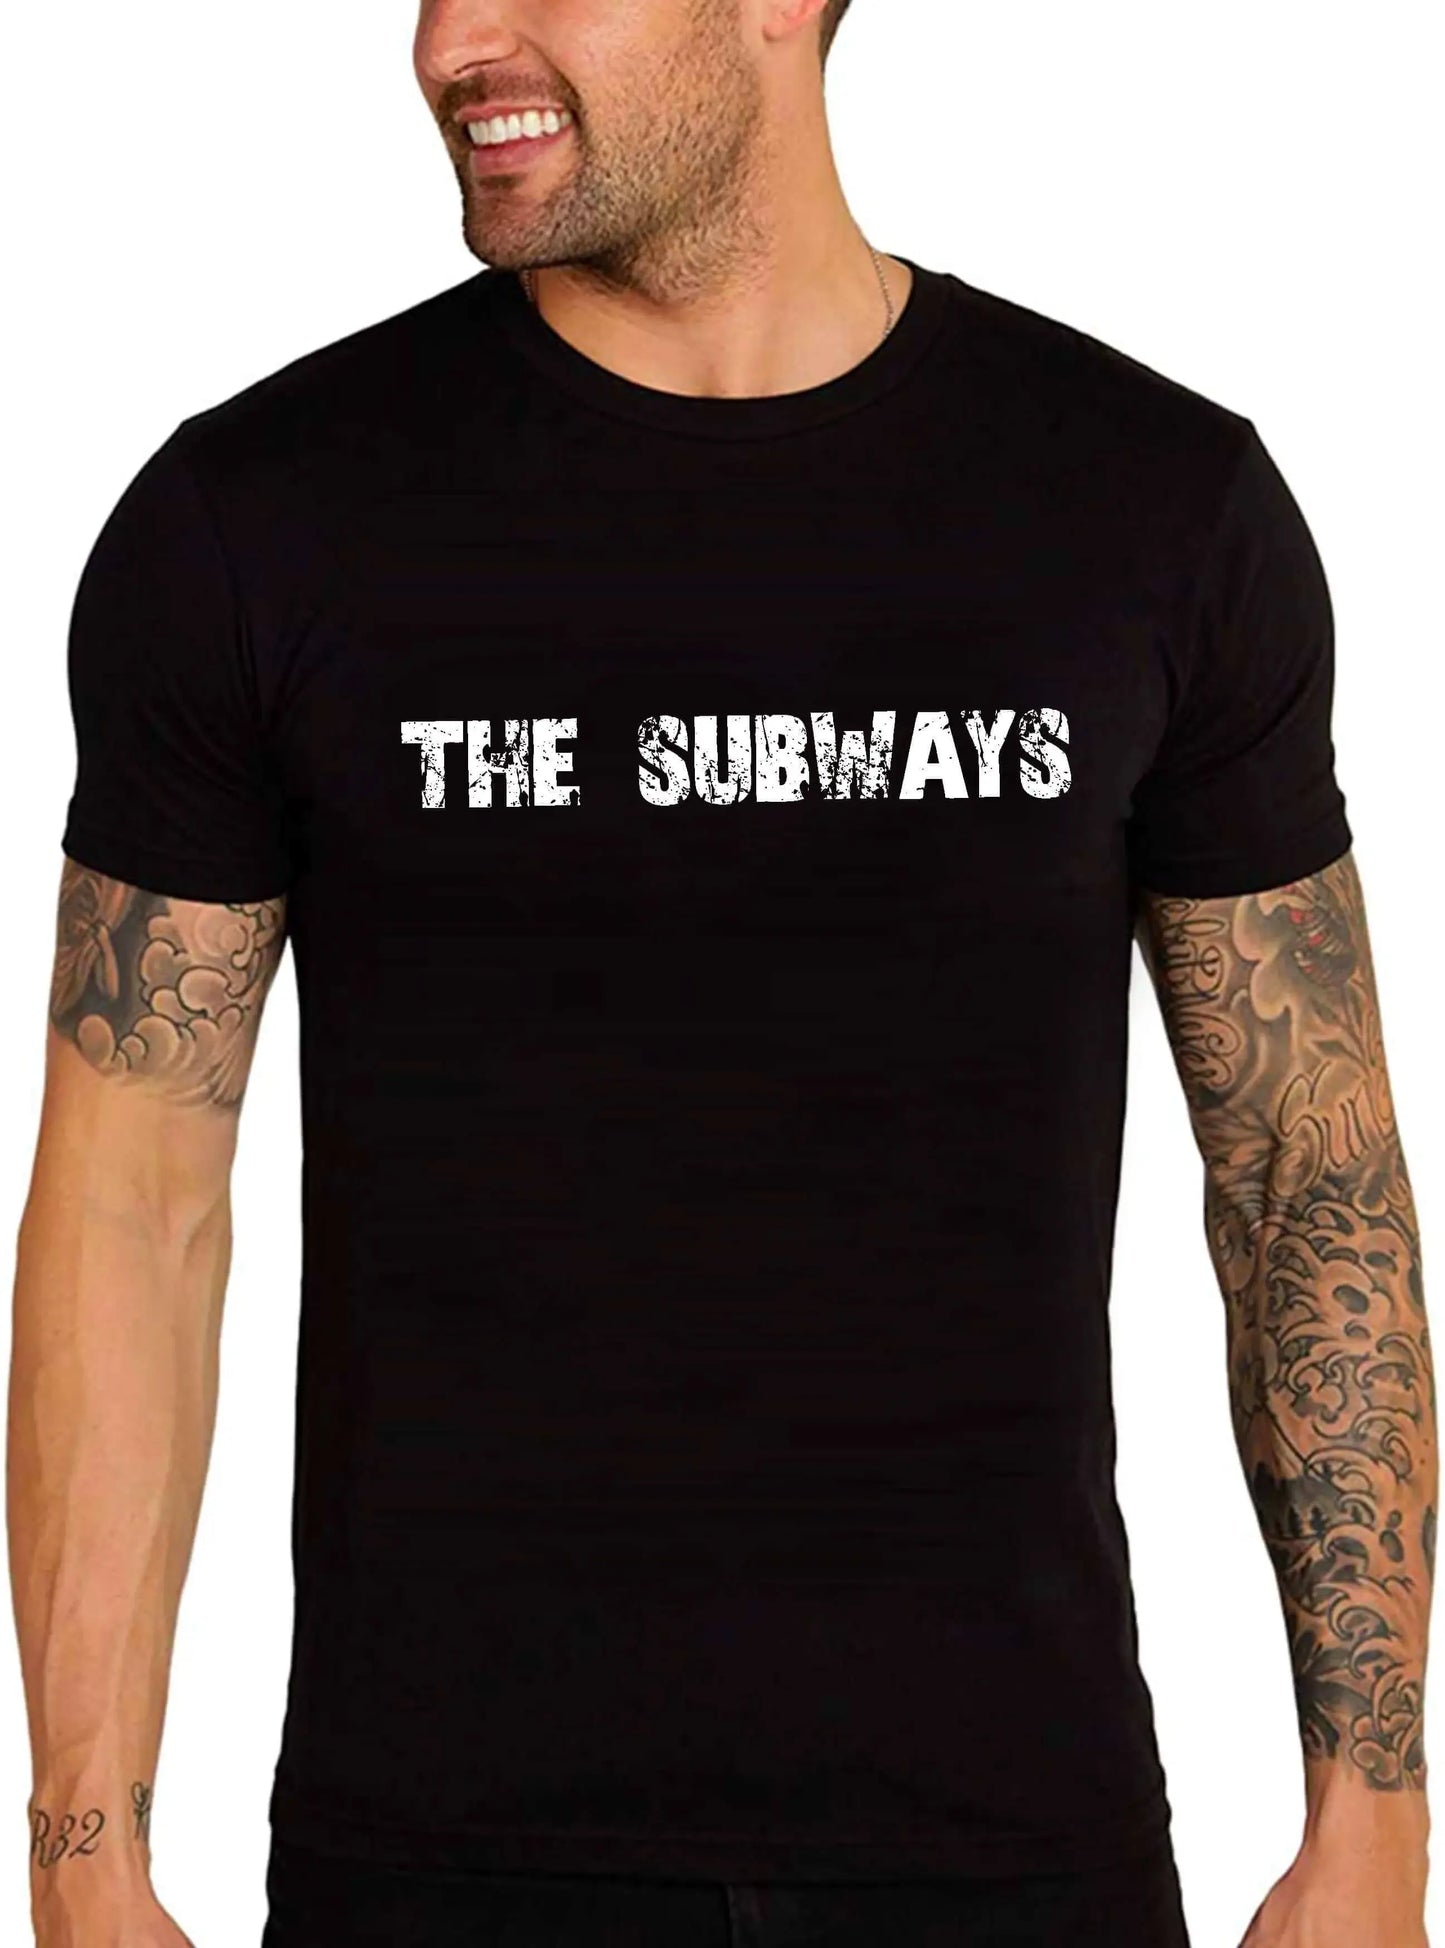 Men's Graphic T-Shirt The Subways Eco-Friendly Limited Edition Short Sleeve Tee-Shirt Vintage Birthday Gift Novelty